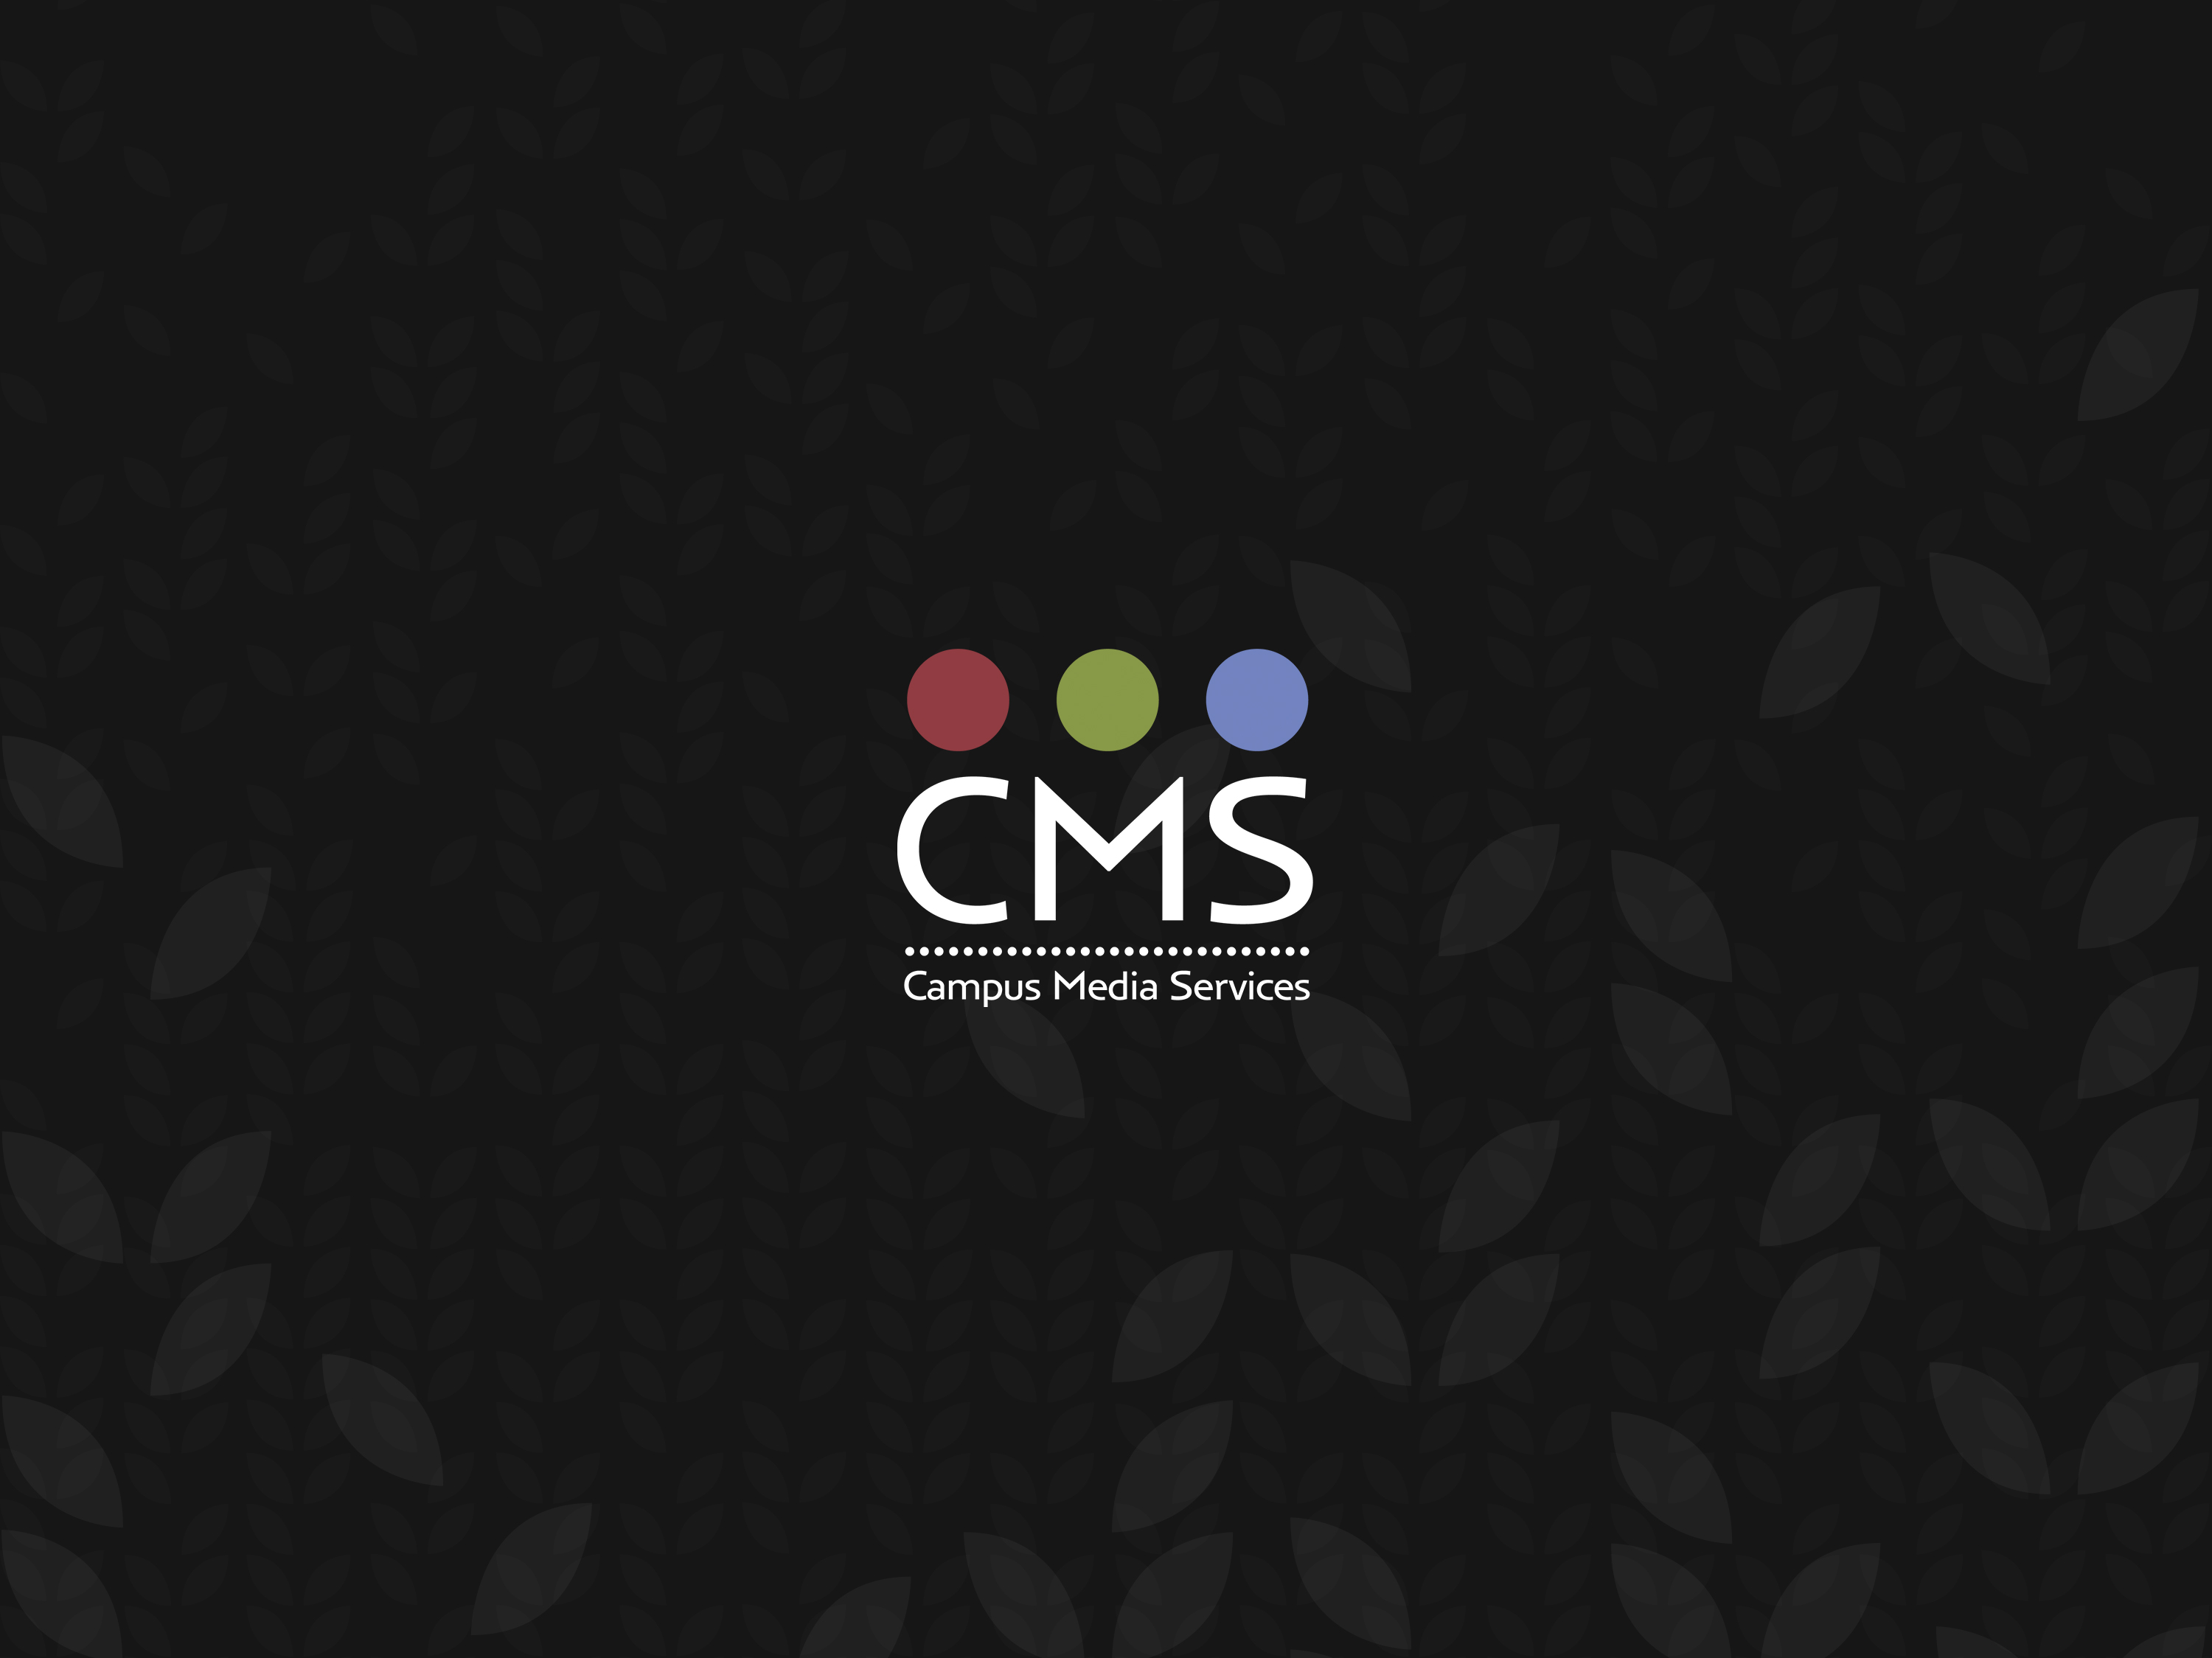 Campus Media Services Logo with red, green, and blue Dots above the name